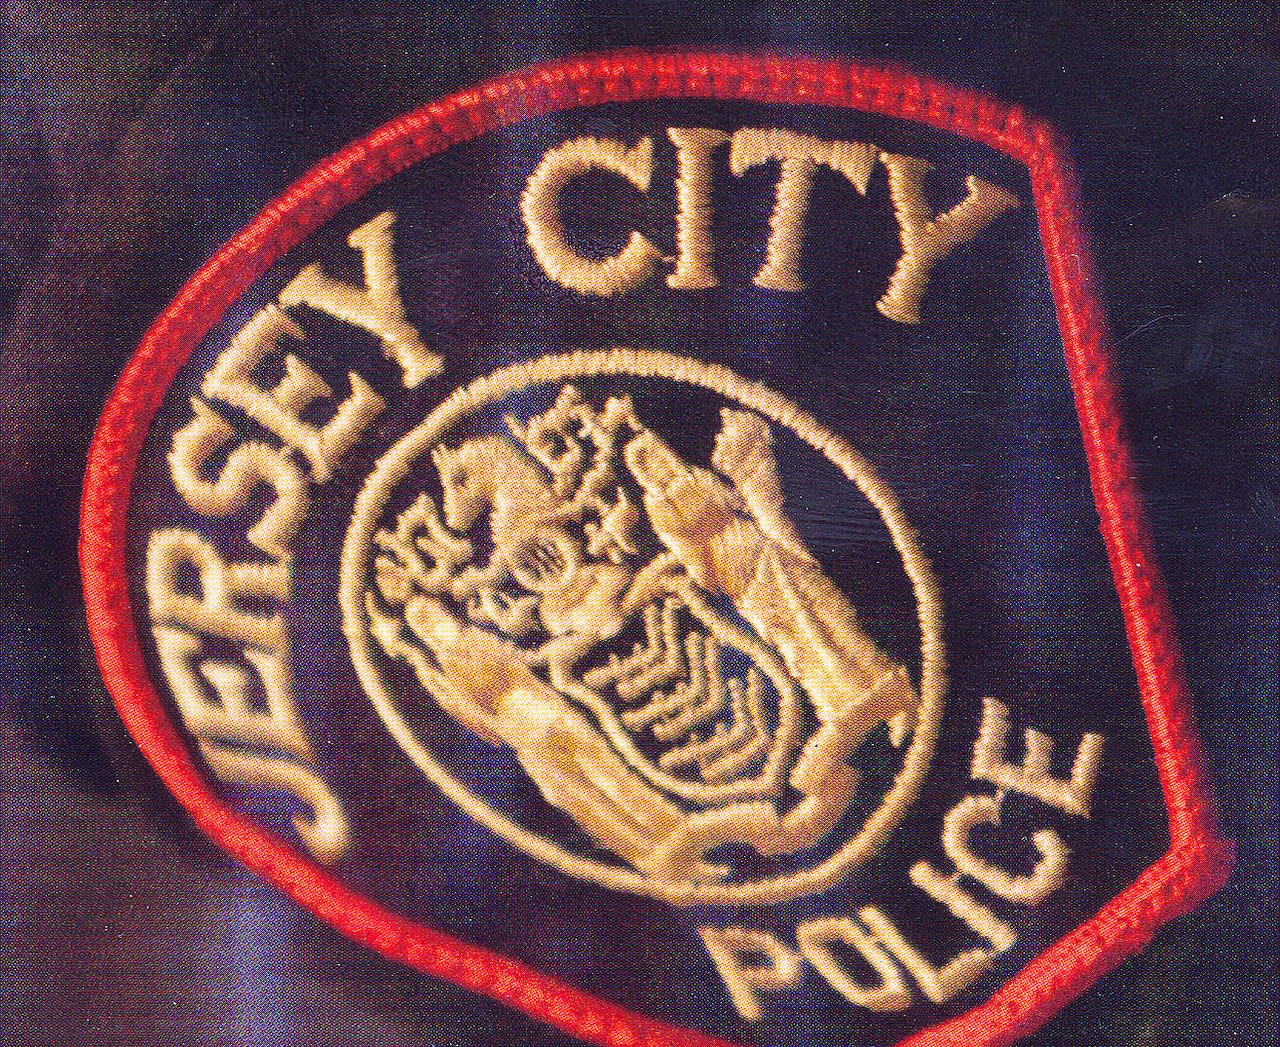 Jersey City ordered to reinstate cannabis cops or face $100 daily fines